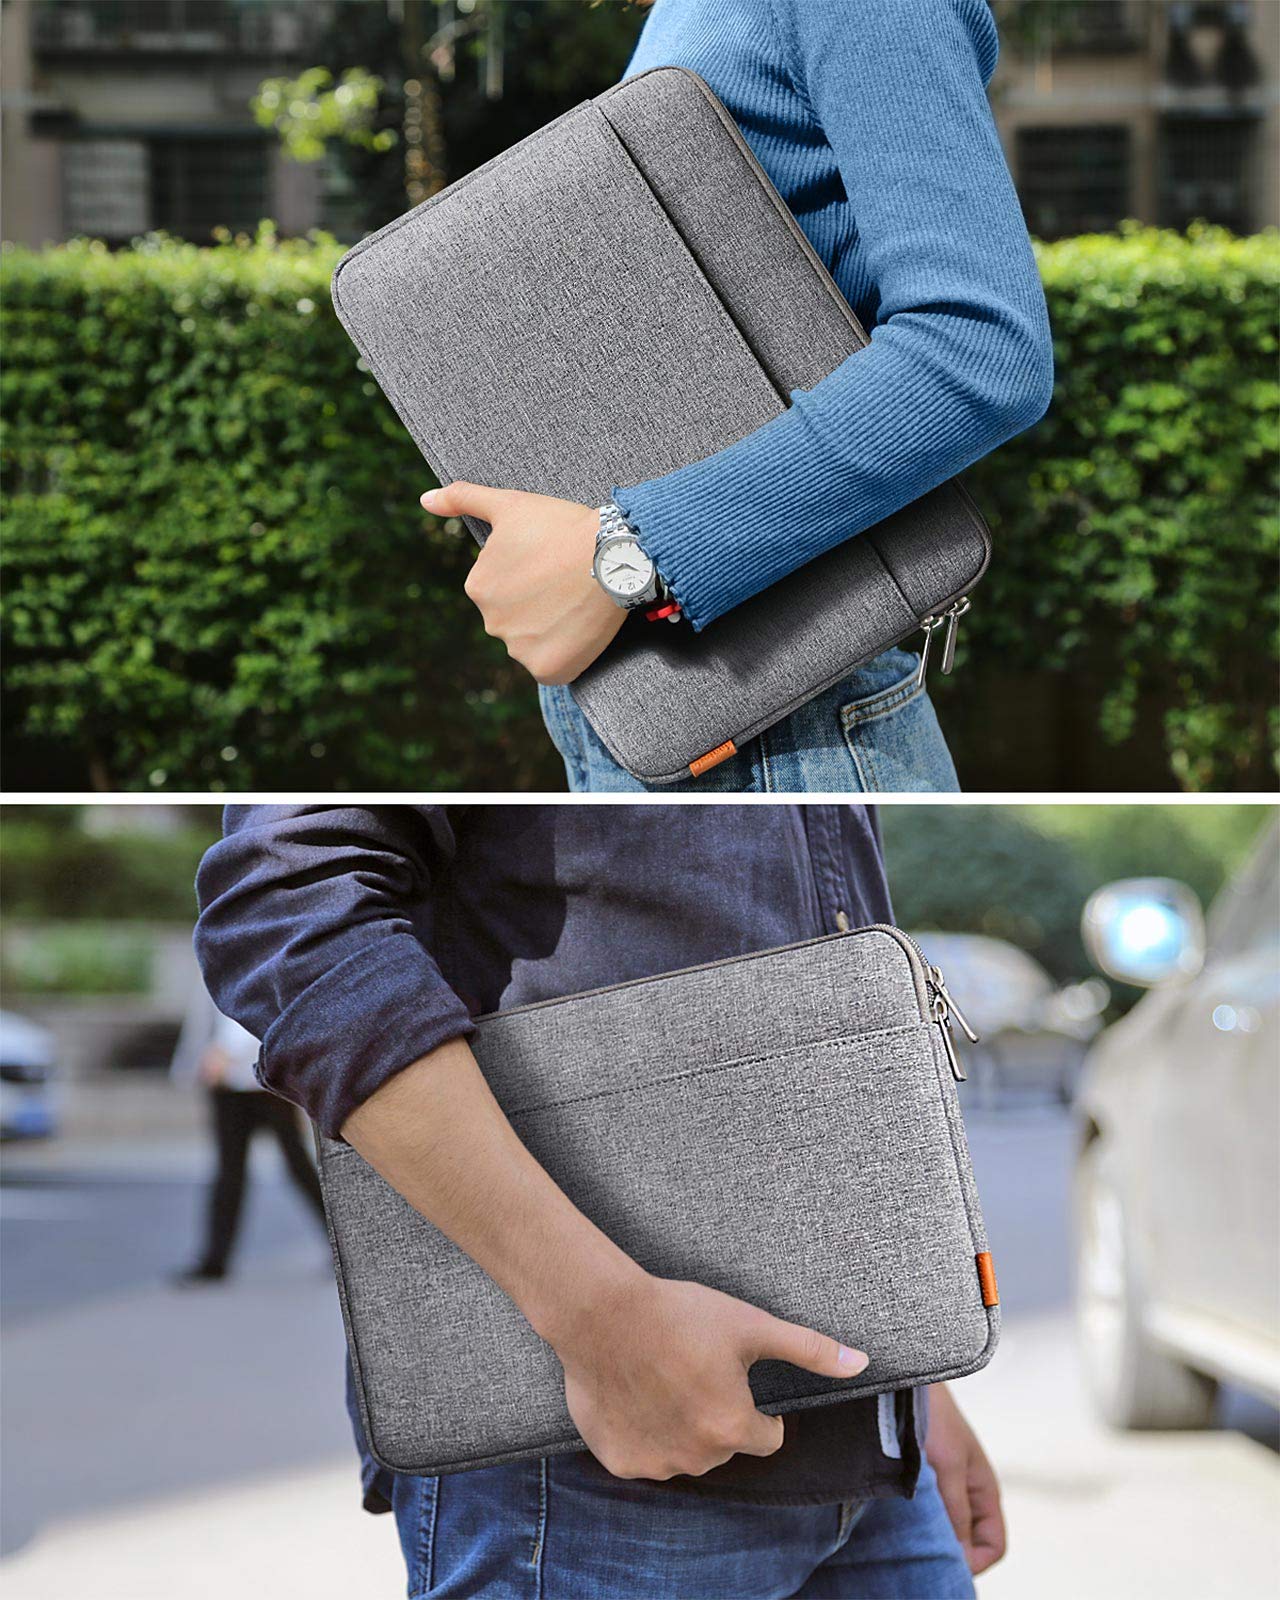 Inateck 13 Inch Laptop Case Sleeve Compatible with 13 MacBook Air M2/M1 2022-2018, 13 MacBook Pro M2/M1 2022-2016, 12.3 Surface Pro 8/7/6/X/5/4/3, XPS 13 - Grey